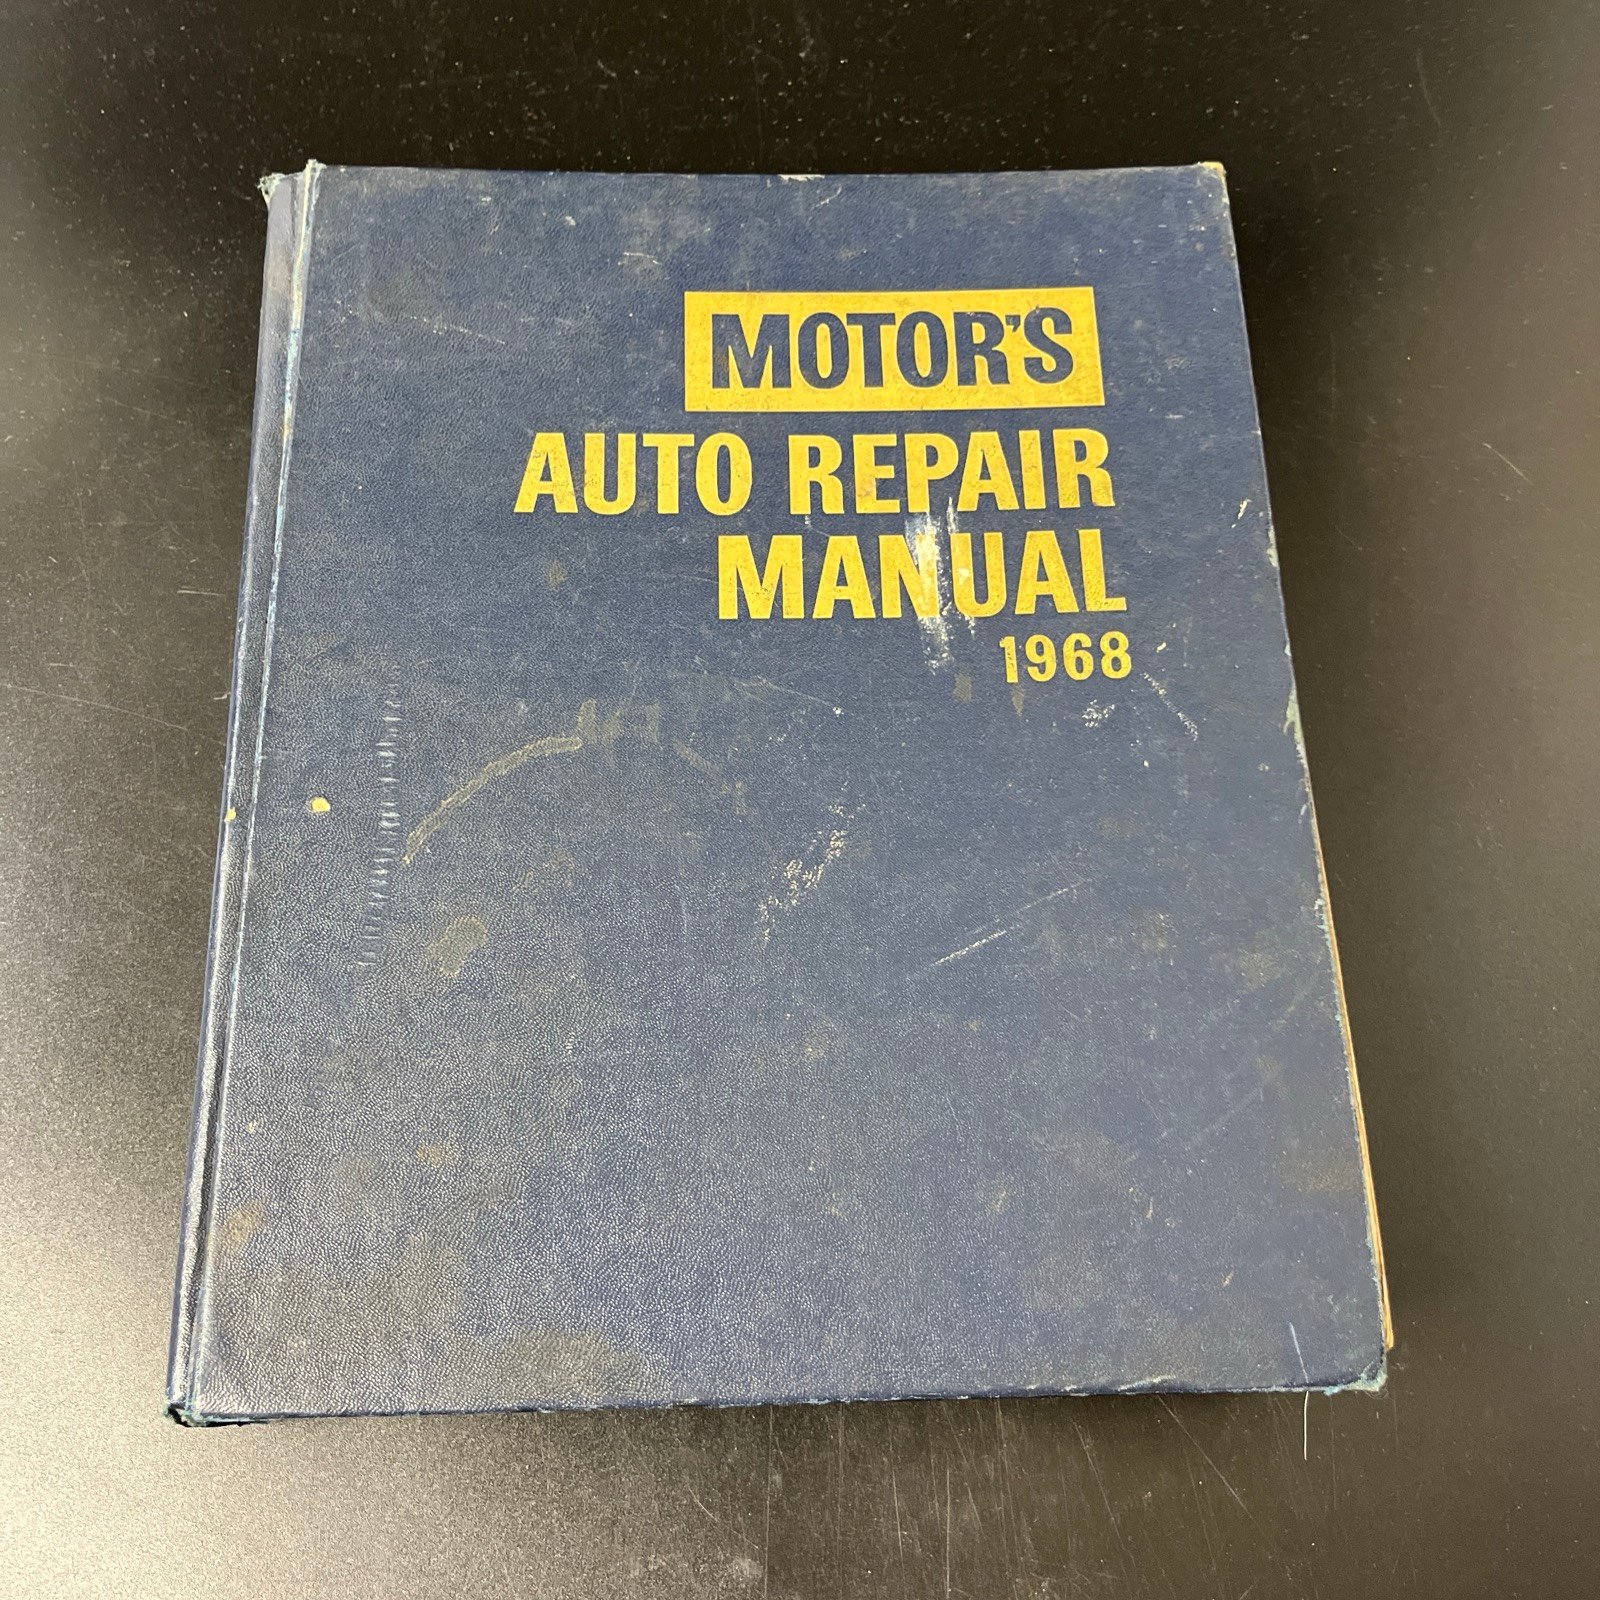 Vintage 1968 Motor´s Auto Repair Manual 31st Edition Hardcover GM Ford AMC Jeep BwS7ffGUo